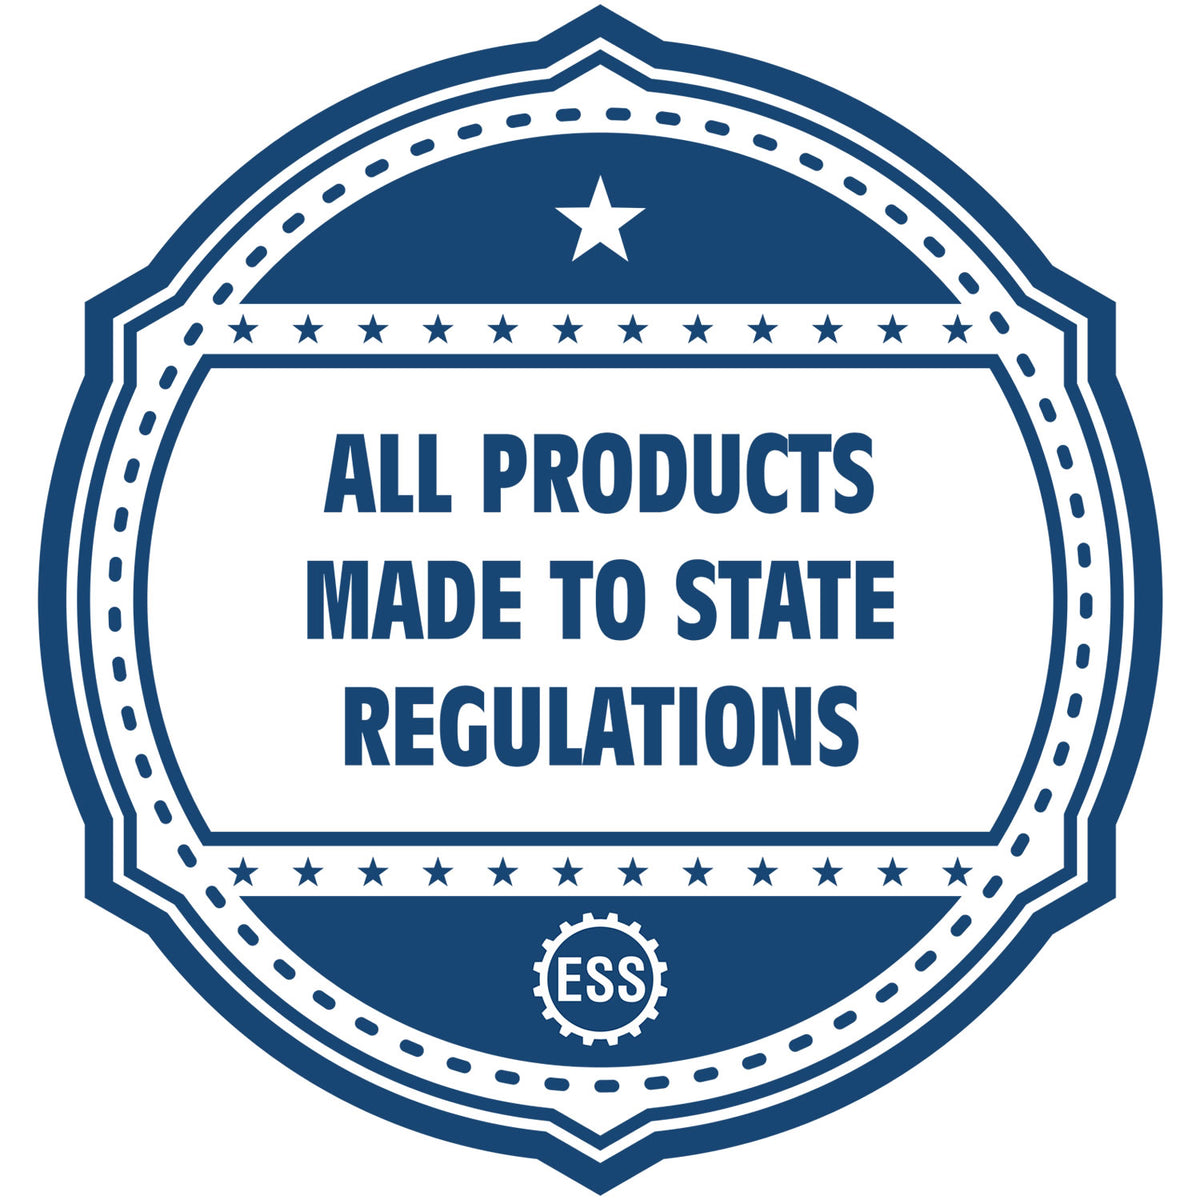 An icon or badge element for the Digital Washington PE Stamp and Electronic Seal for Washington Engineer showing that this product is made in compliance with state regulations.